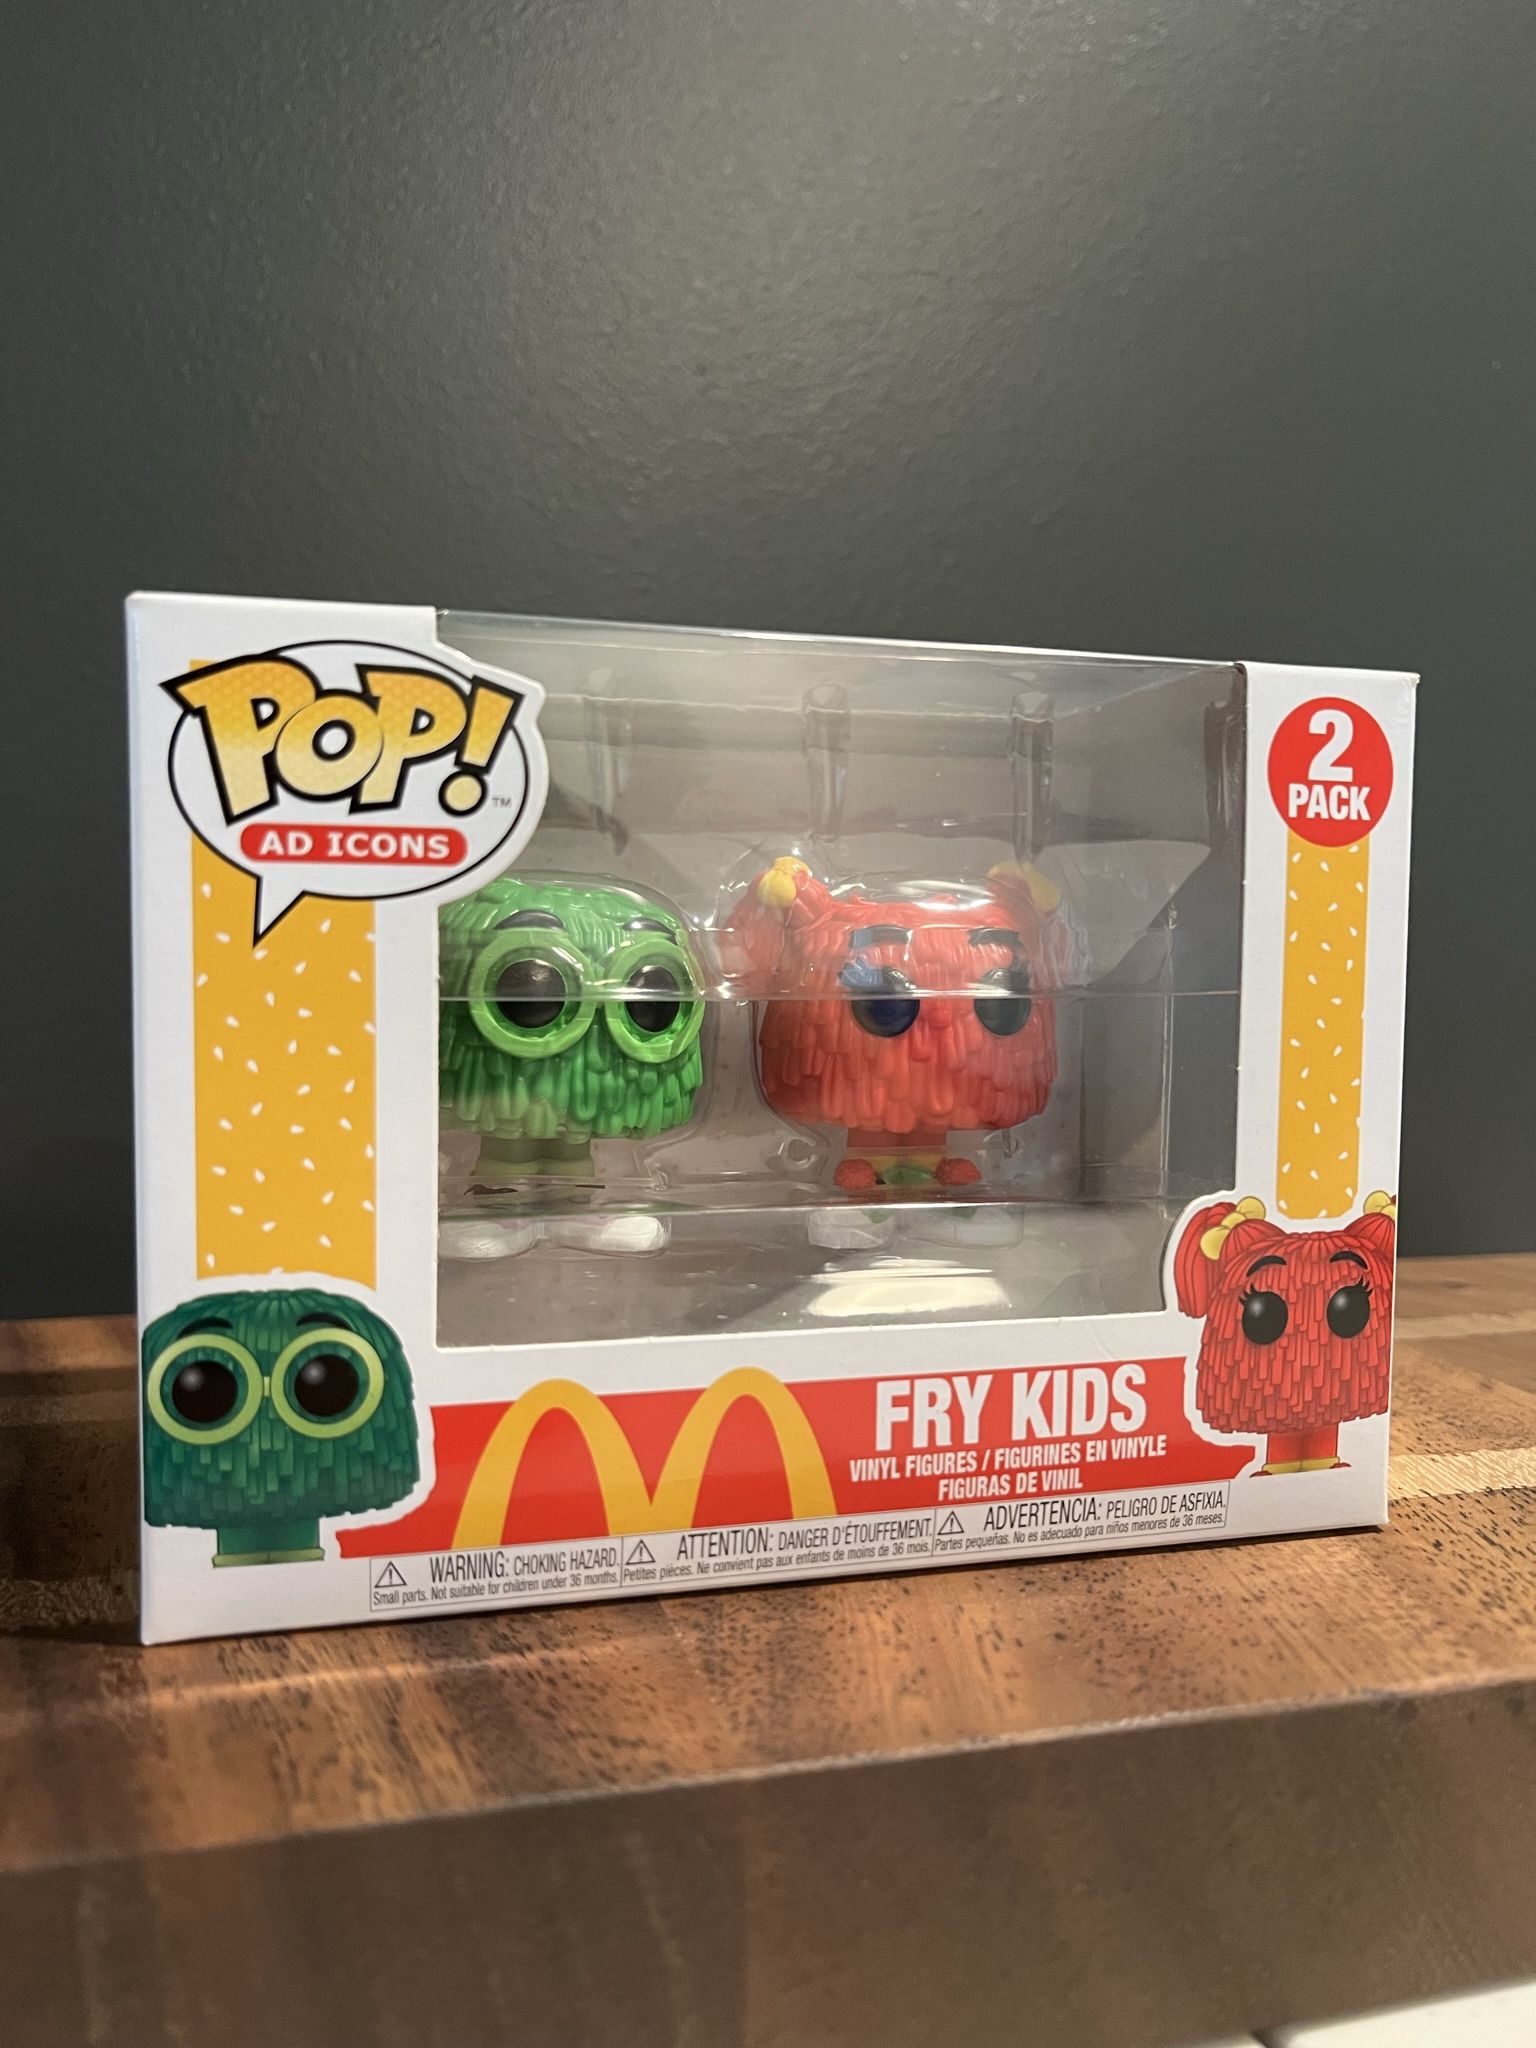 Funko POP! AD Icon Fry Kids 2-Pack (Green & Red)